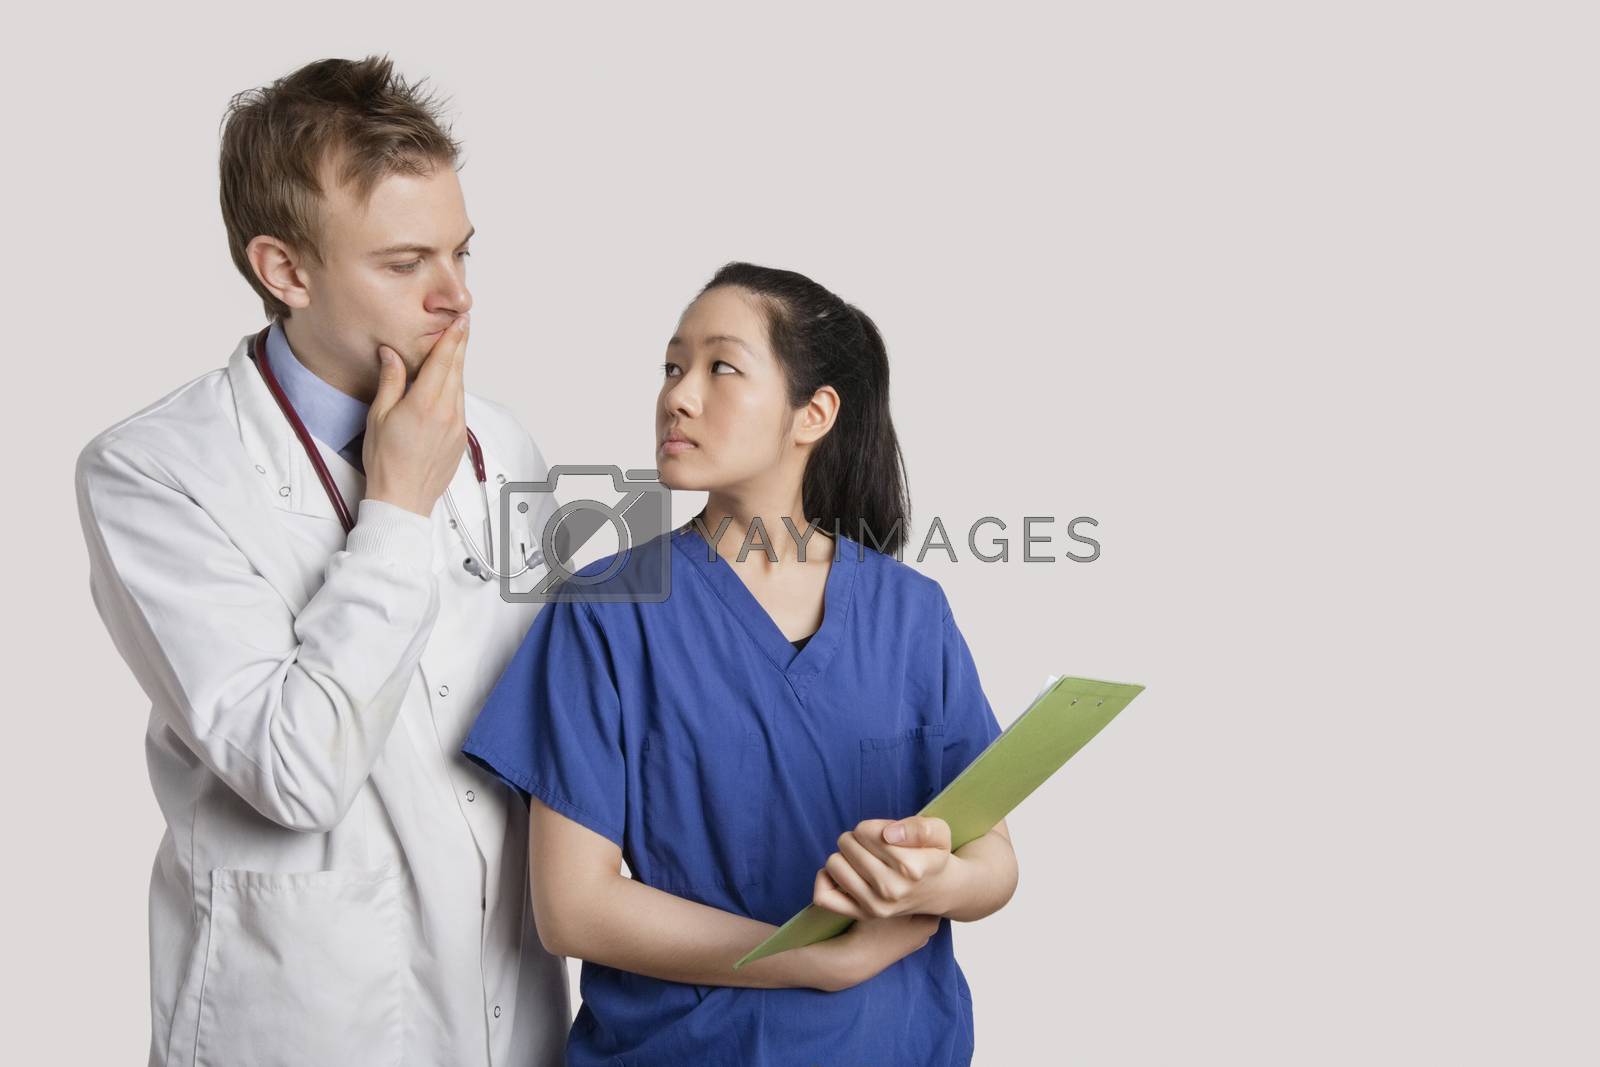 Royalty free image of Serious Caucasian doctor and Asian nurse looking at each other over gray background by moodboard